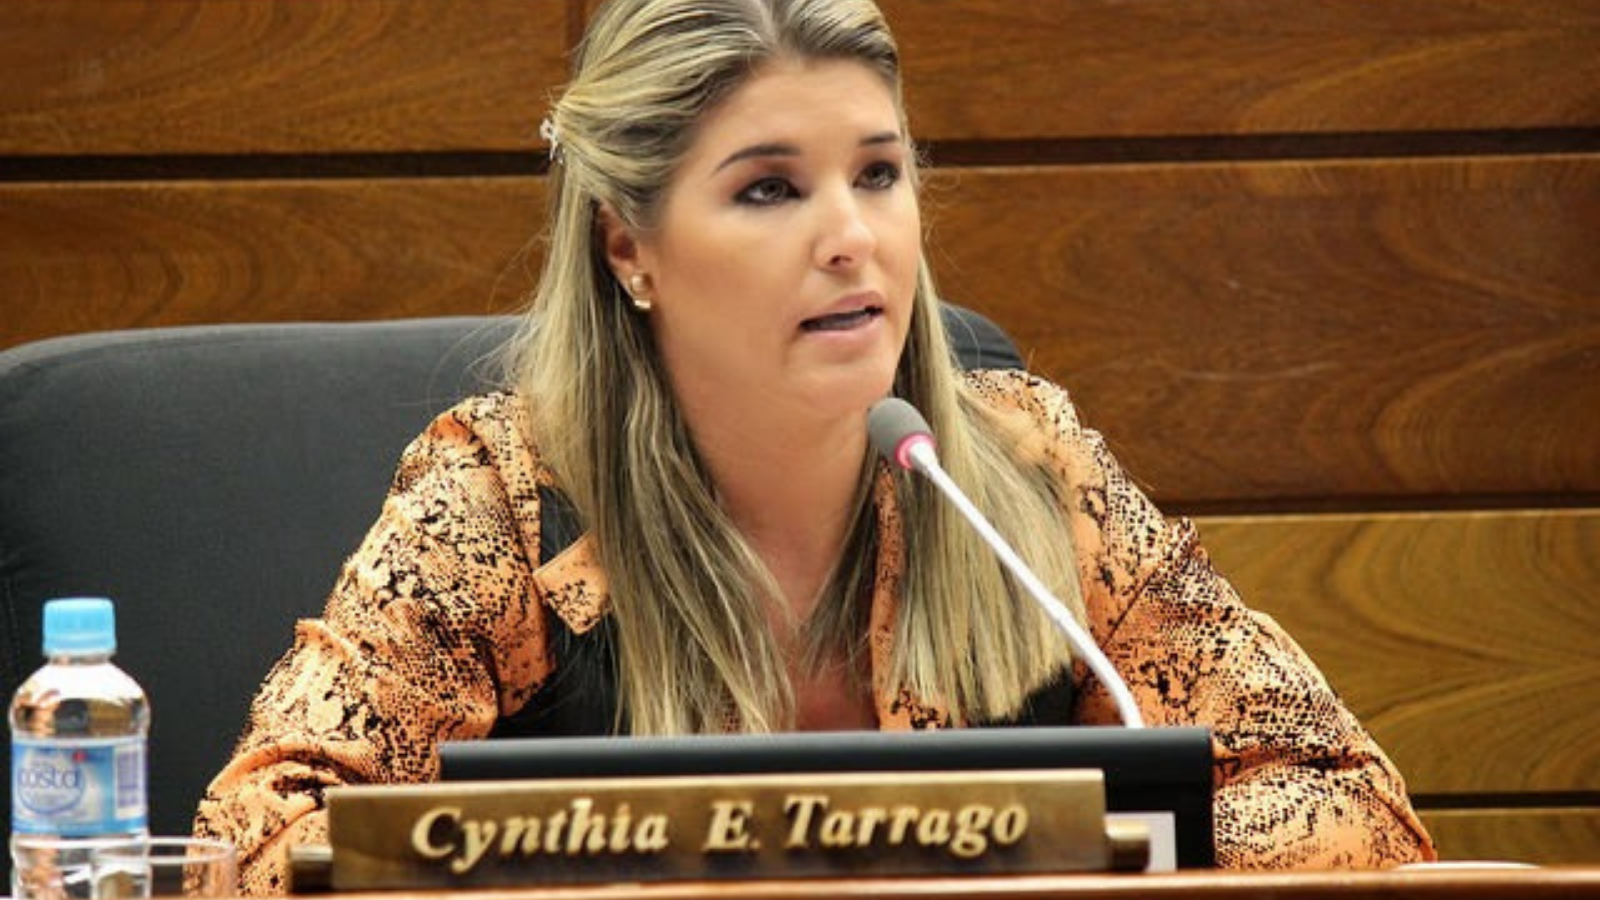 Cynthia Tarragó would request to be affiliated with the ANR again